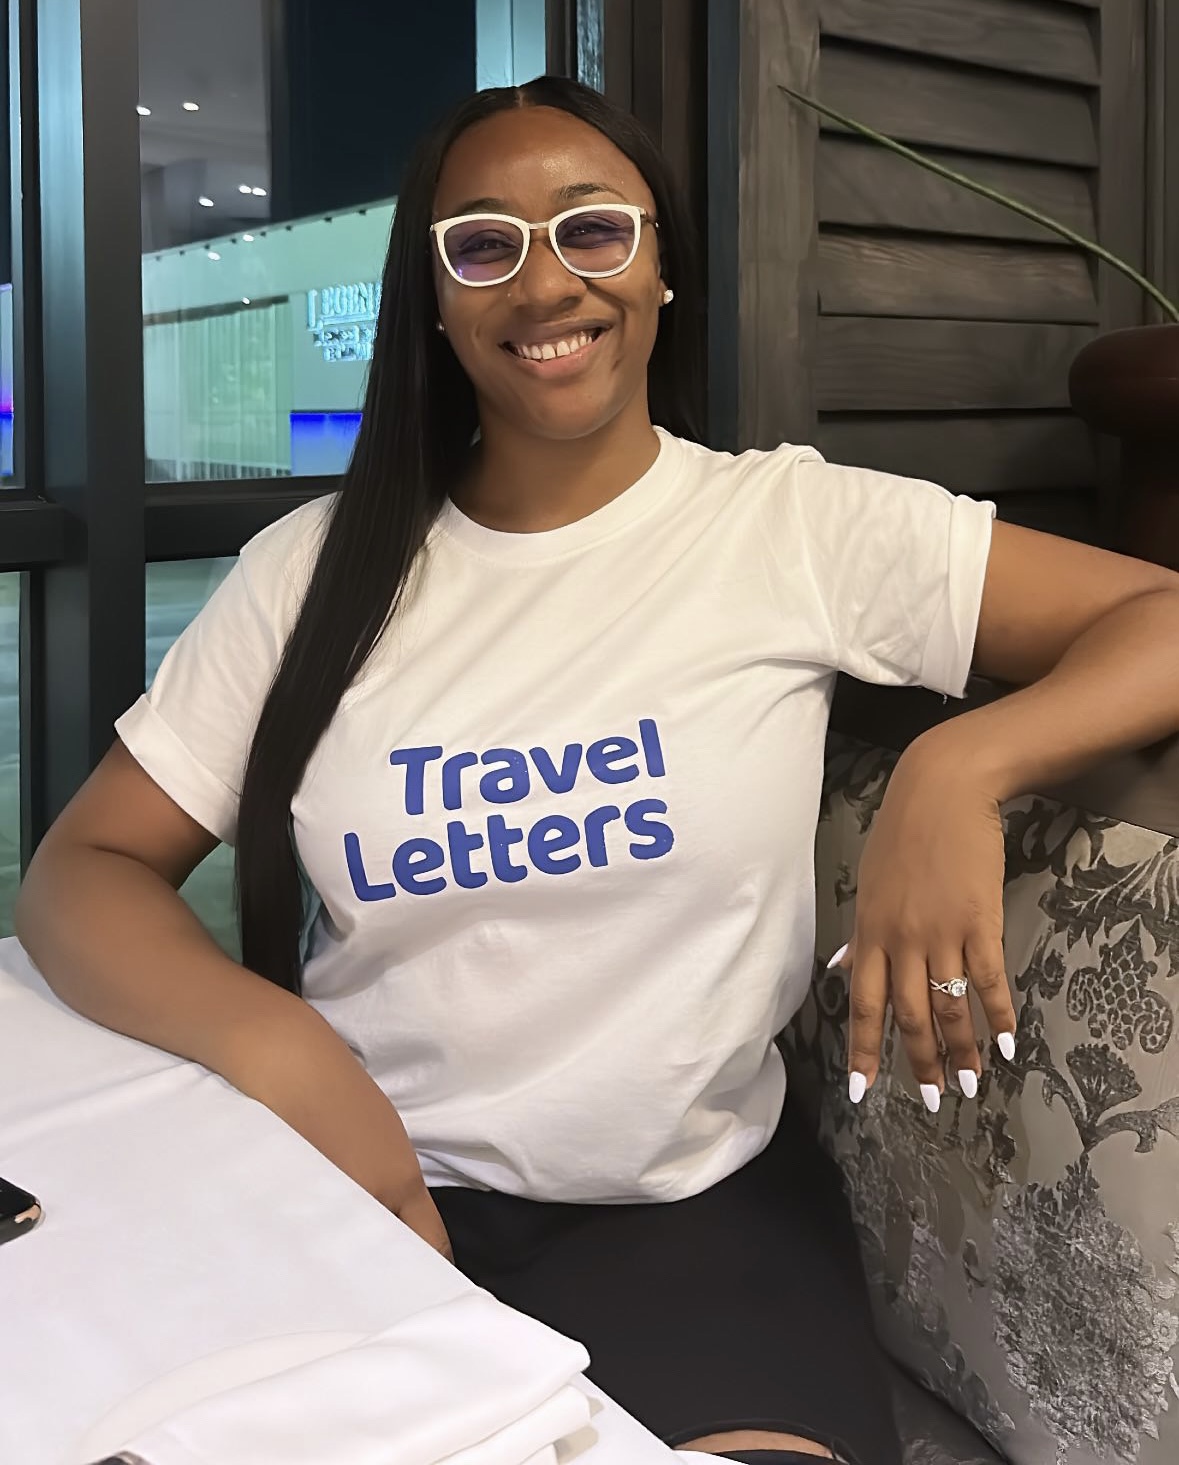 Muna from Travelletters